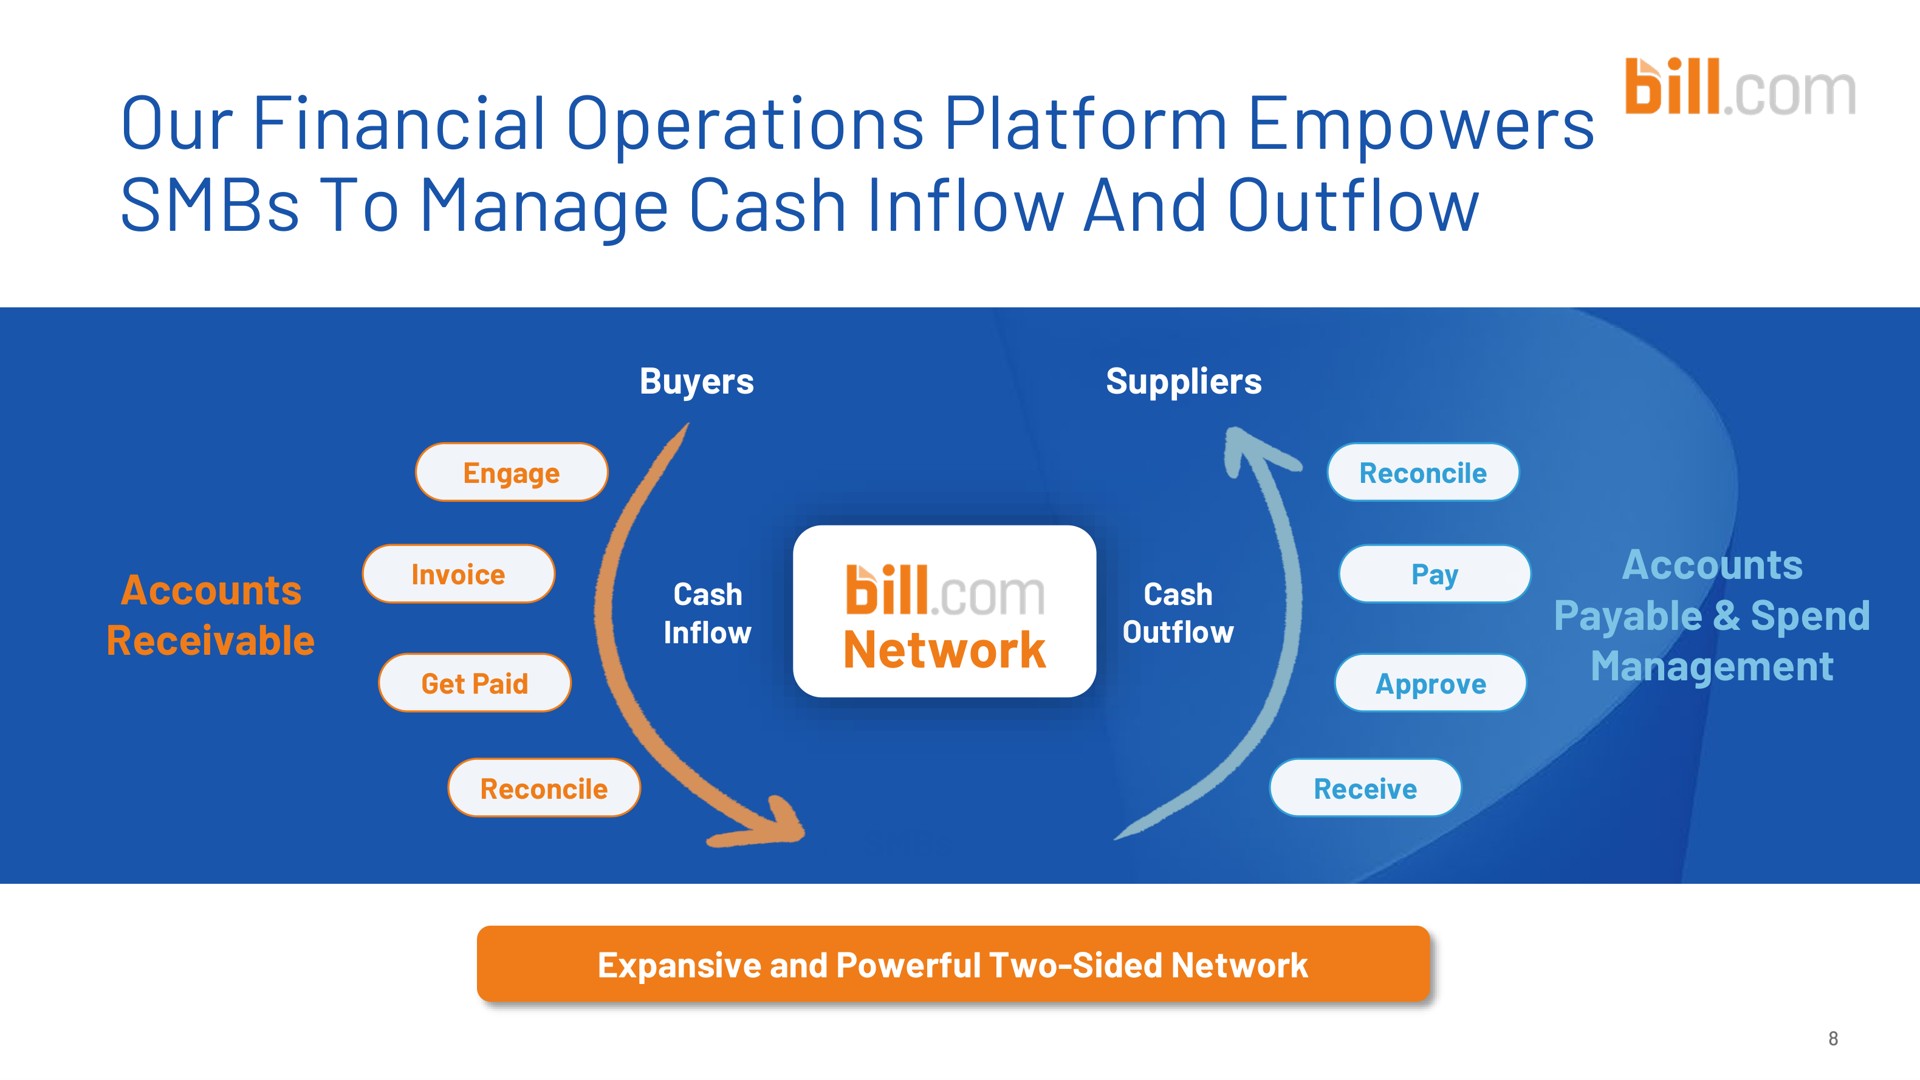 our financial operations platform empowers to manage cash inflow and outflow bill | Bill.com